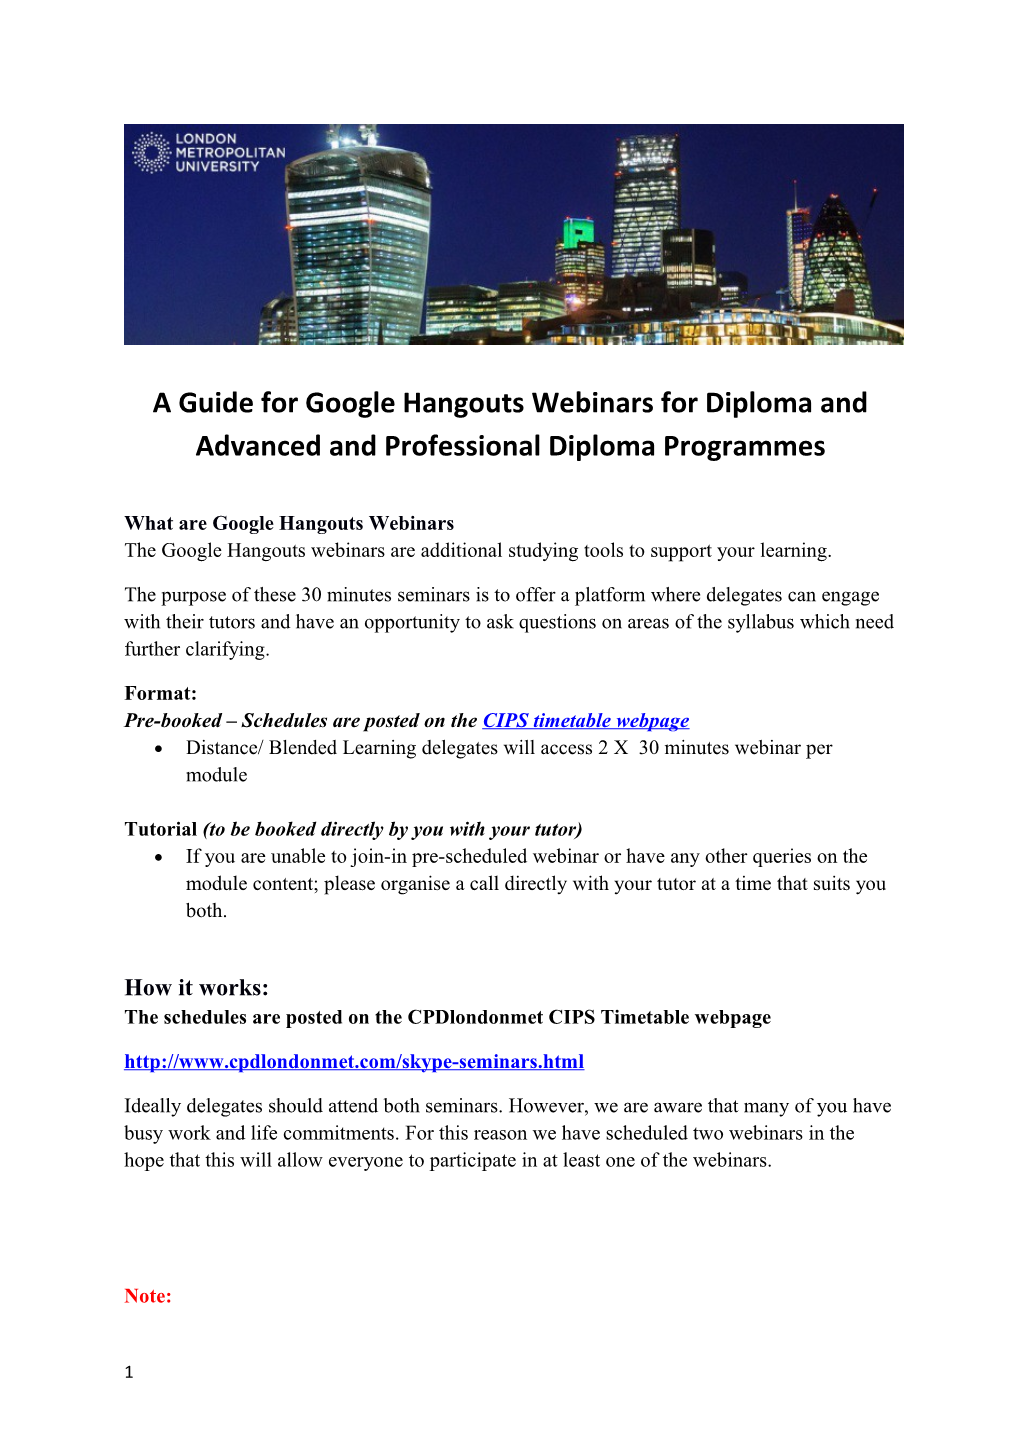 A Guide for Google Hangouts Webinars for Diploma and Advanced and Professional Diploma